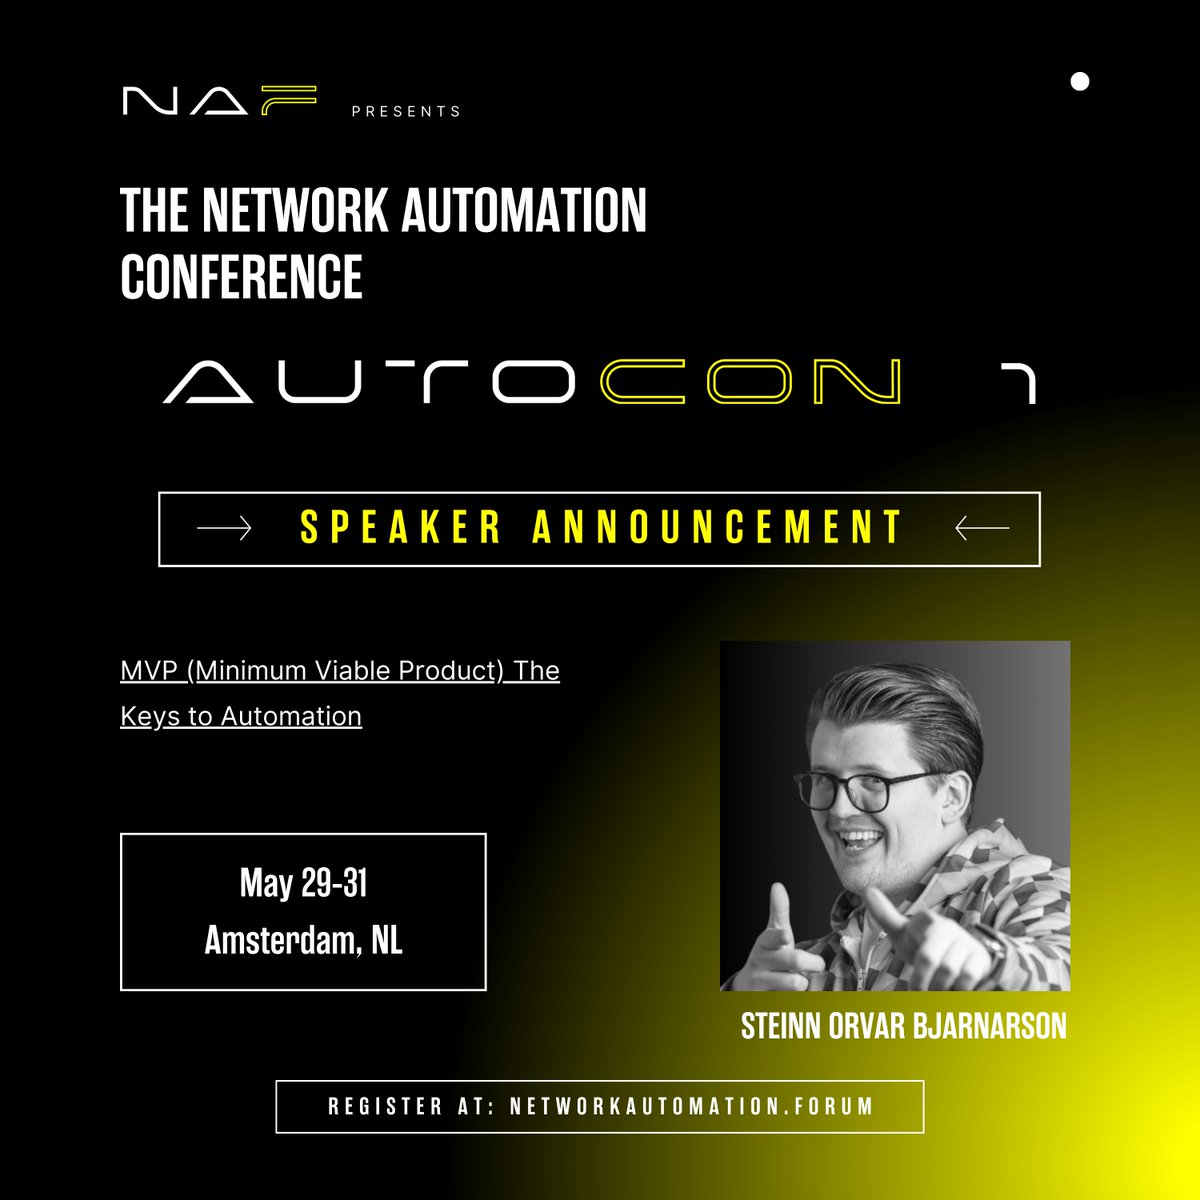 #AutoCon1 Speaker Announcement: Stein Orvar Bjarnarson - 'MVP (Minimum Viable Product) The Keys to Automation'

The Network Automation Forum looks forward to having Steinn share his knowledge and passion for #networkautomation at AutoCon 1 in #Amsterdam!

linkedin.com/feed/update/ur…